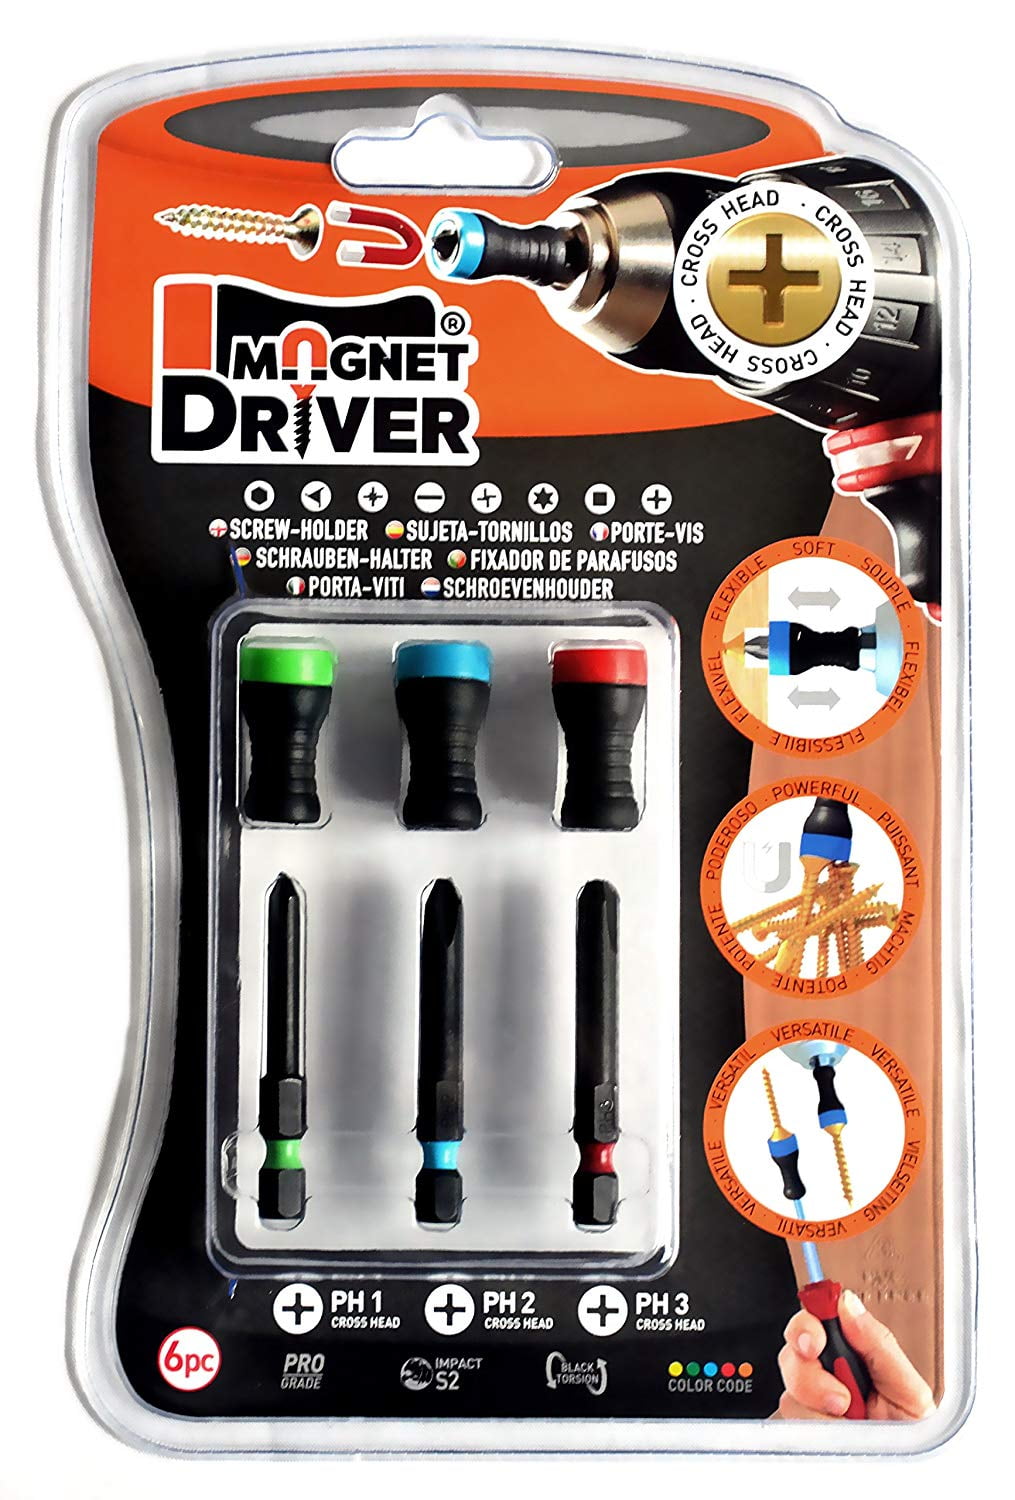 Magnetic Screwdriver Attachment Details about   Magnet Driver Screw-Holder by Micaton 